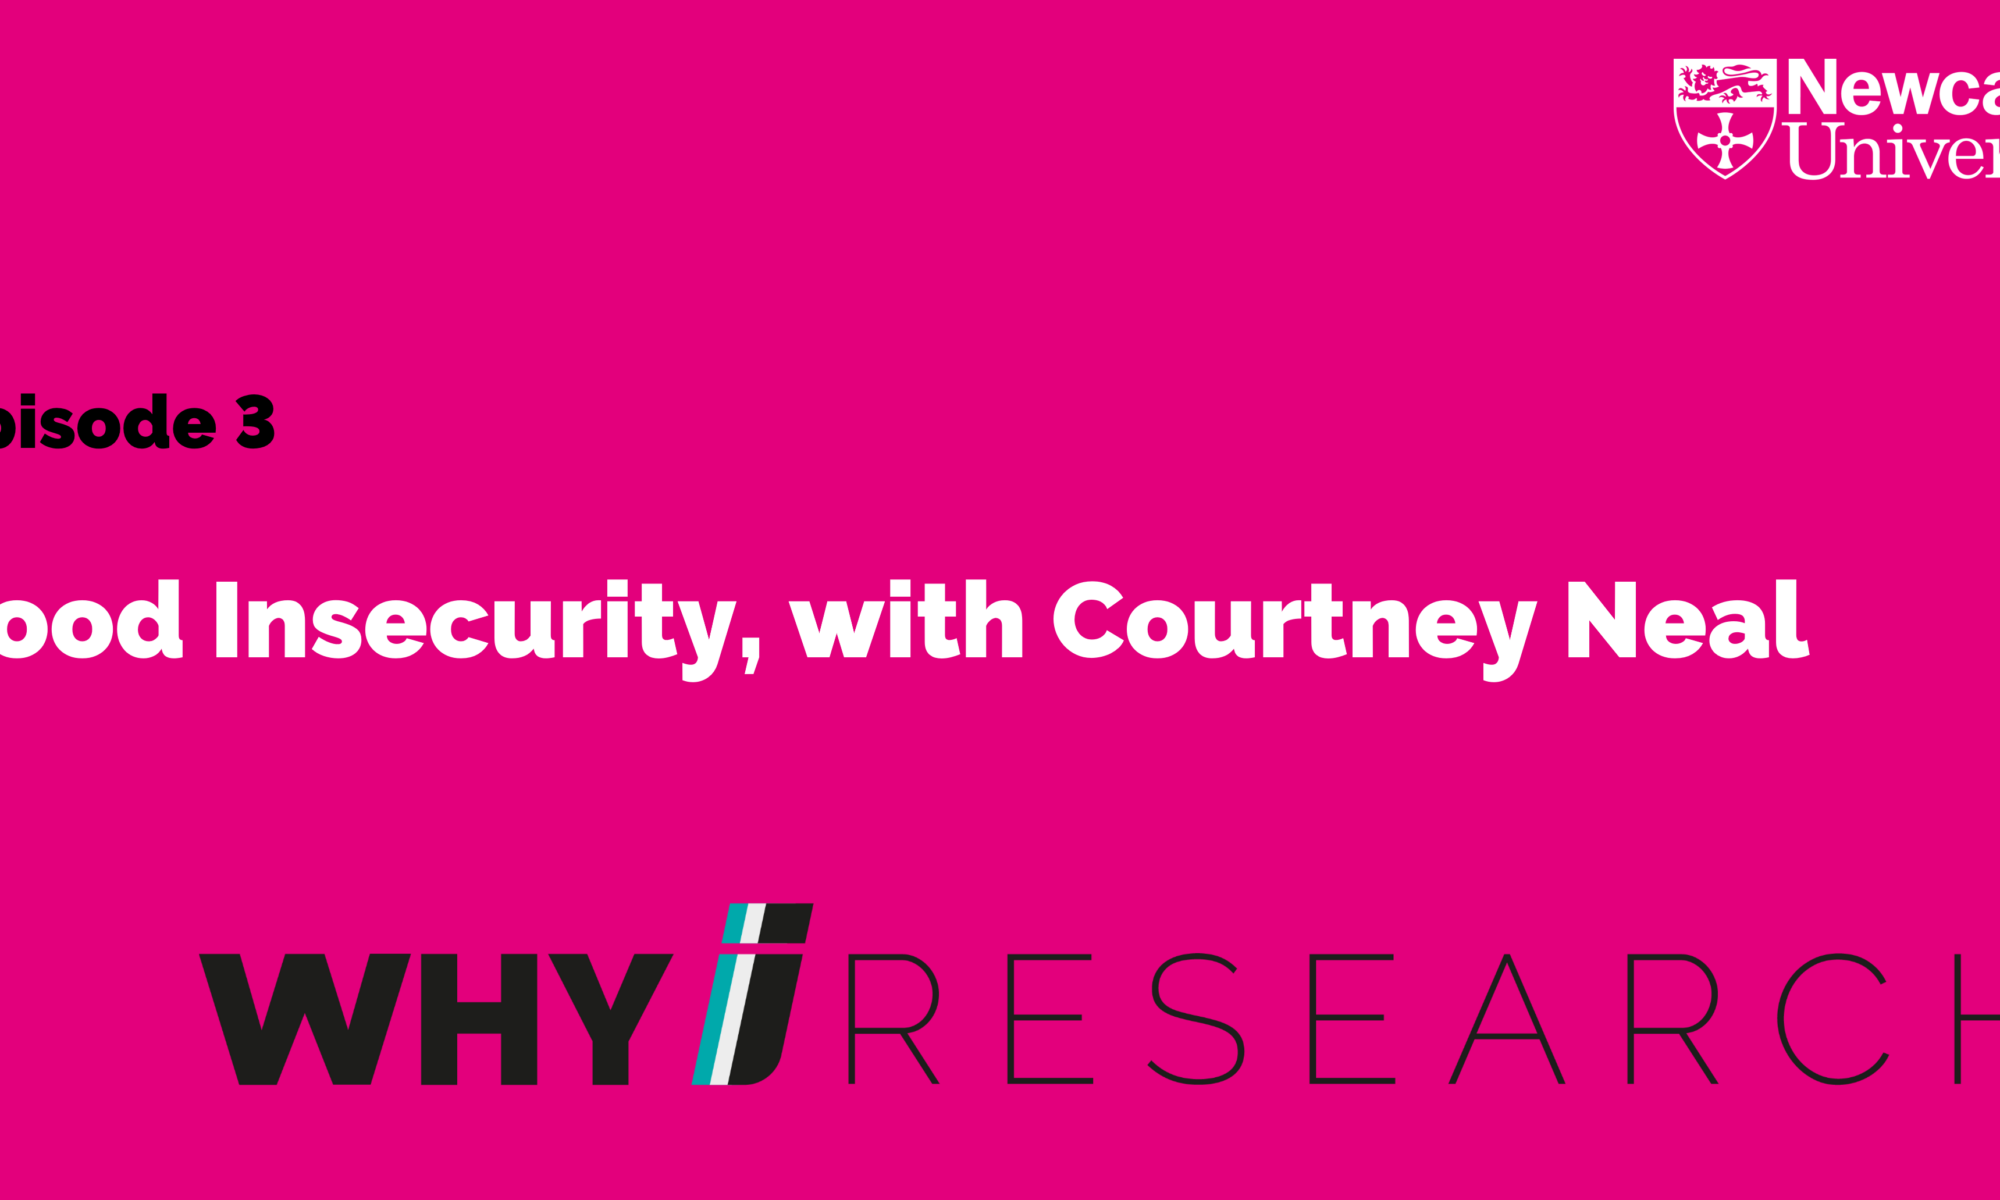 Food insecurity with courtney neal